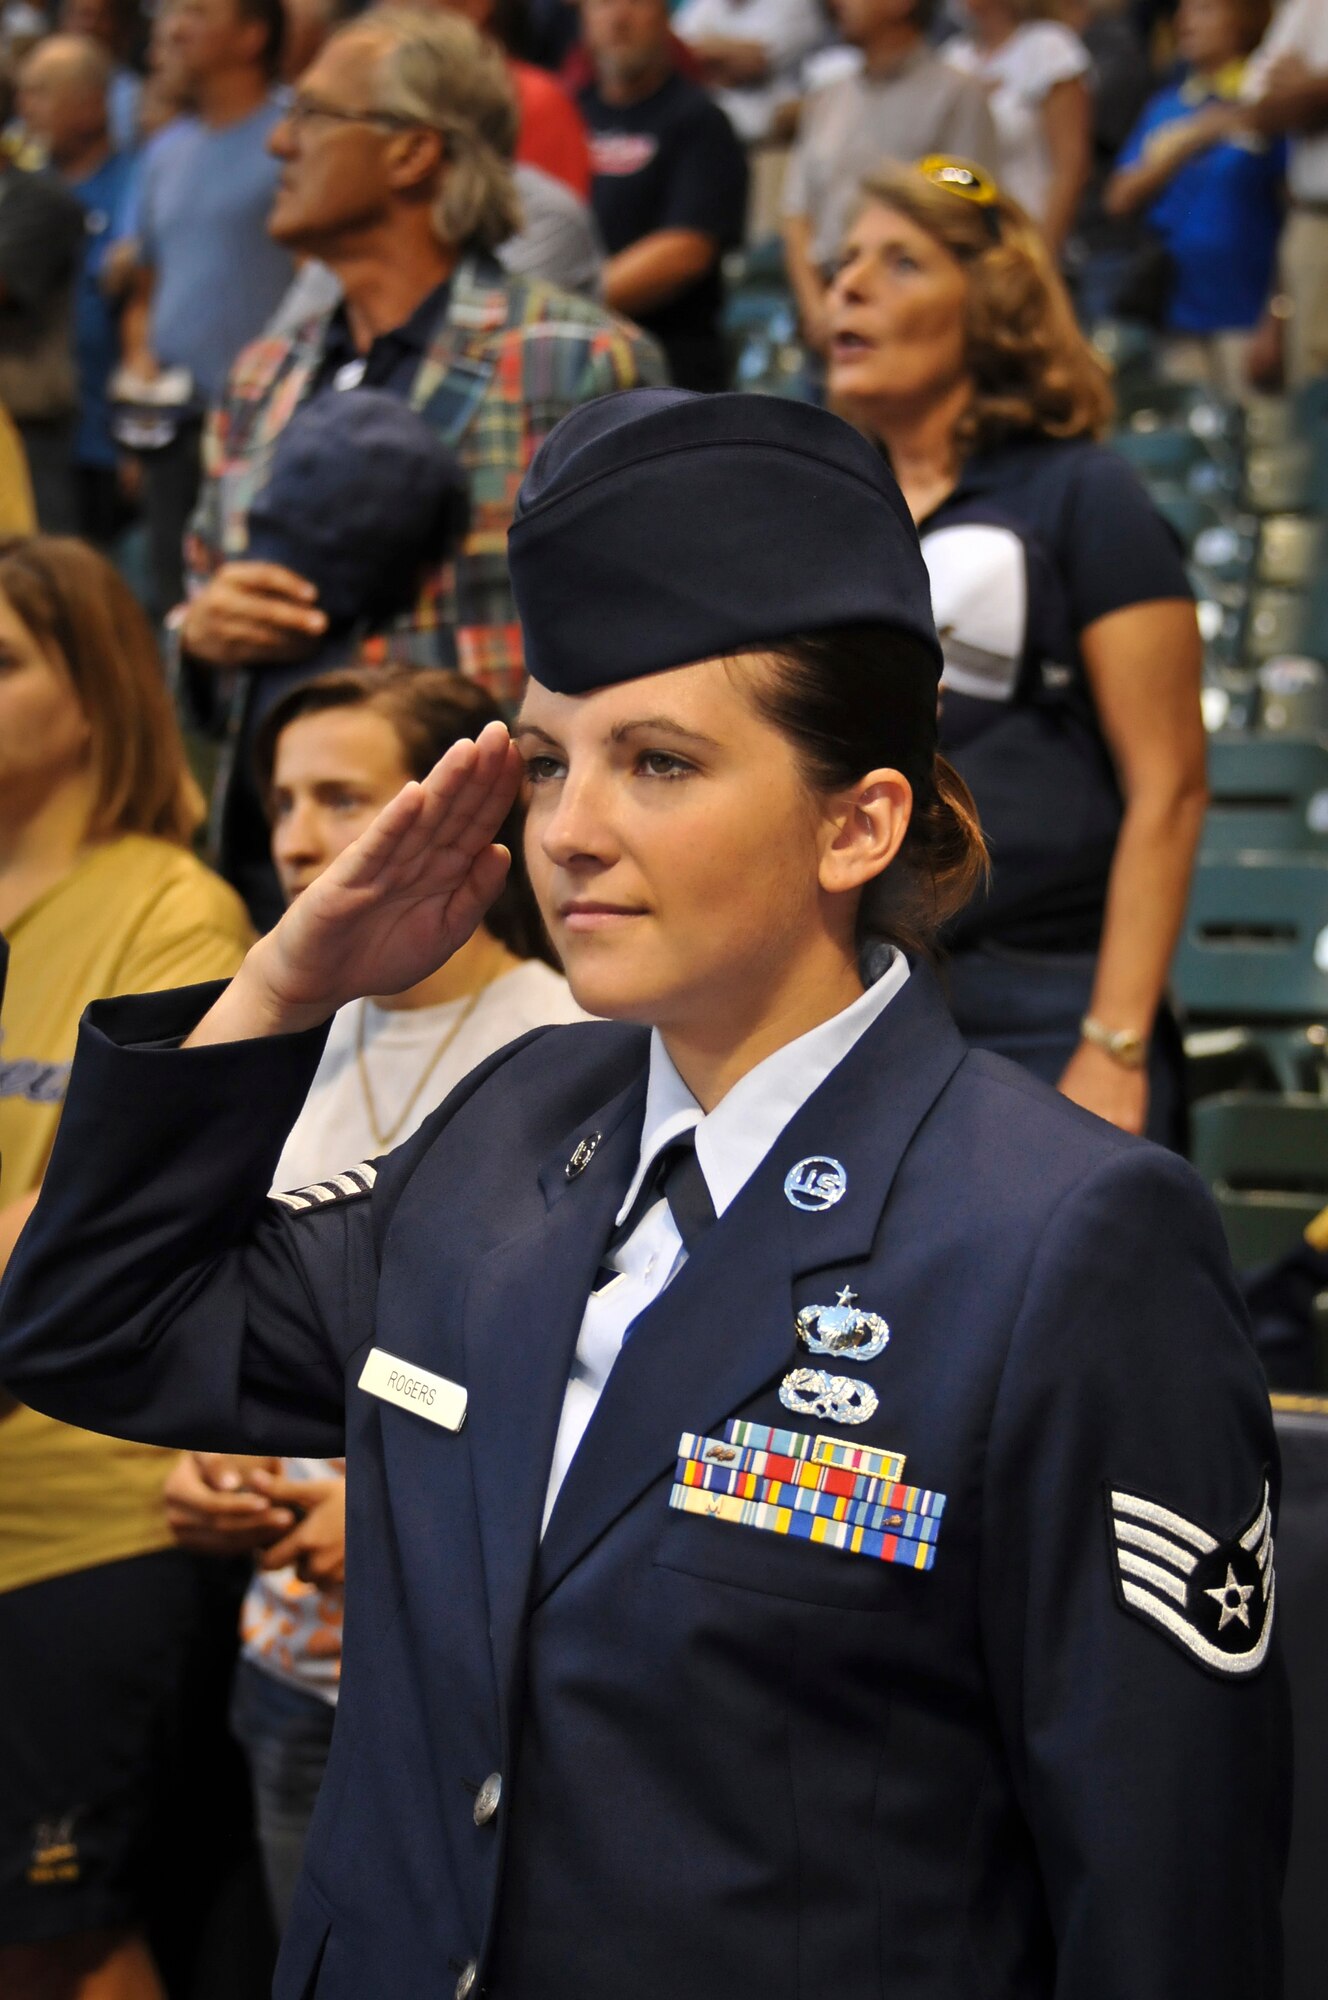 Staff Sgt. Leah Rogers of the 128th Air Refueling Wing renders a salute during the national anthem at Miller Park in Milwaukee Wed., Sept. 12, 2012. 
Rogers was selected to represent Wisconsin Air National Guard unit and throw out the ceremonial first pitch before the Brewers’ game against the Atlanta Braves. (Air National Guard Photo by Staff Sgt. Jeremy M. Wilson / Released)
